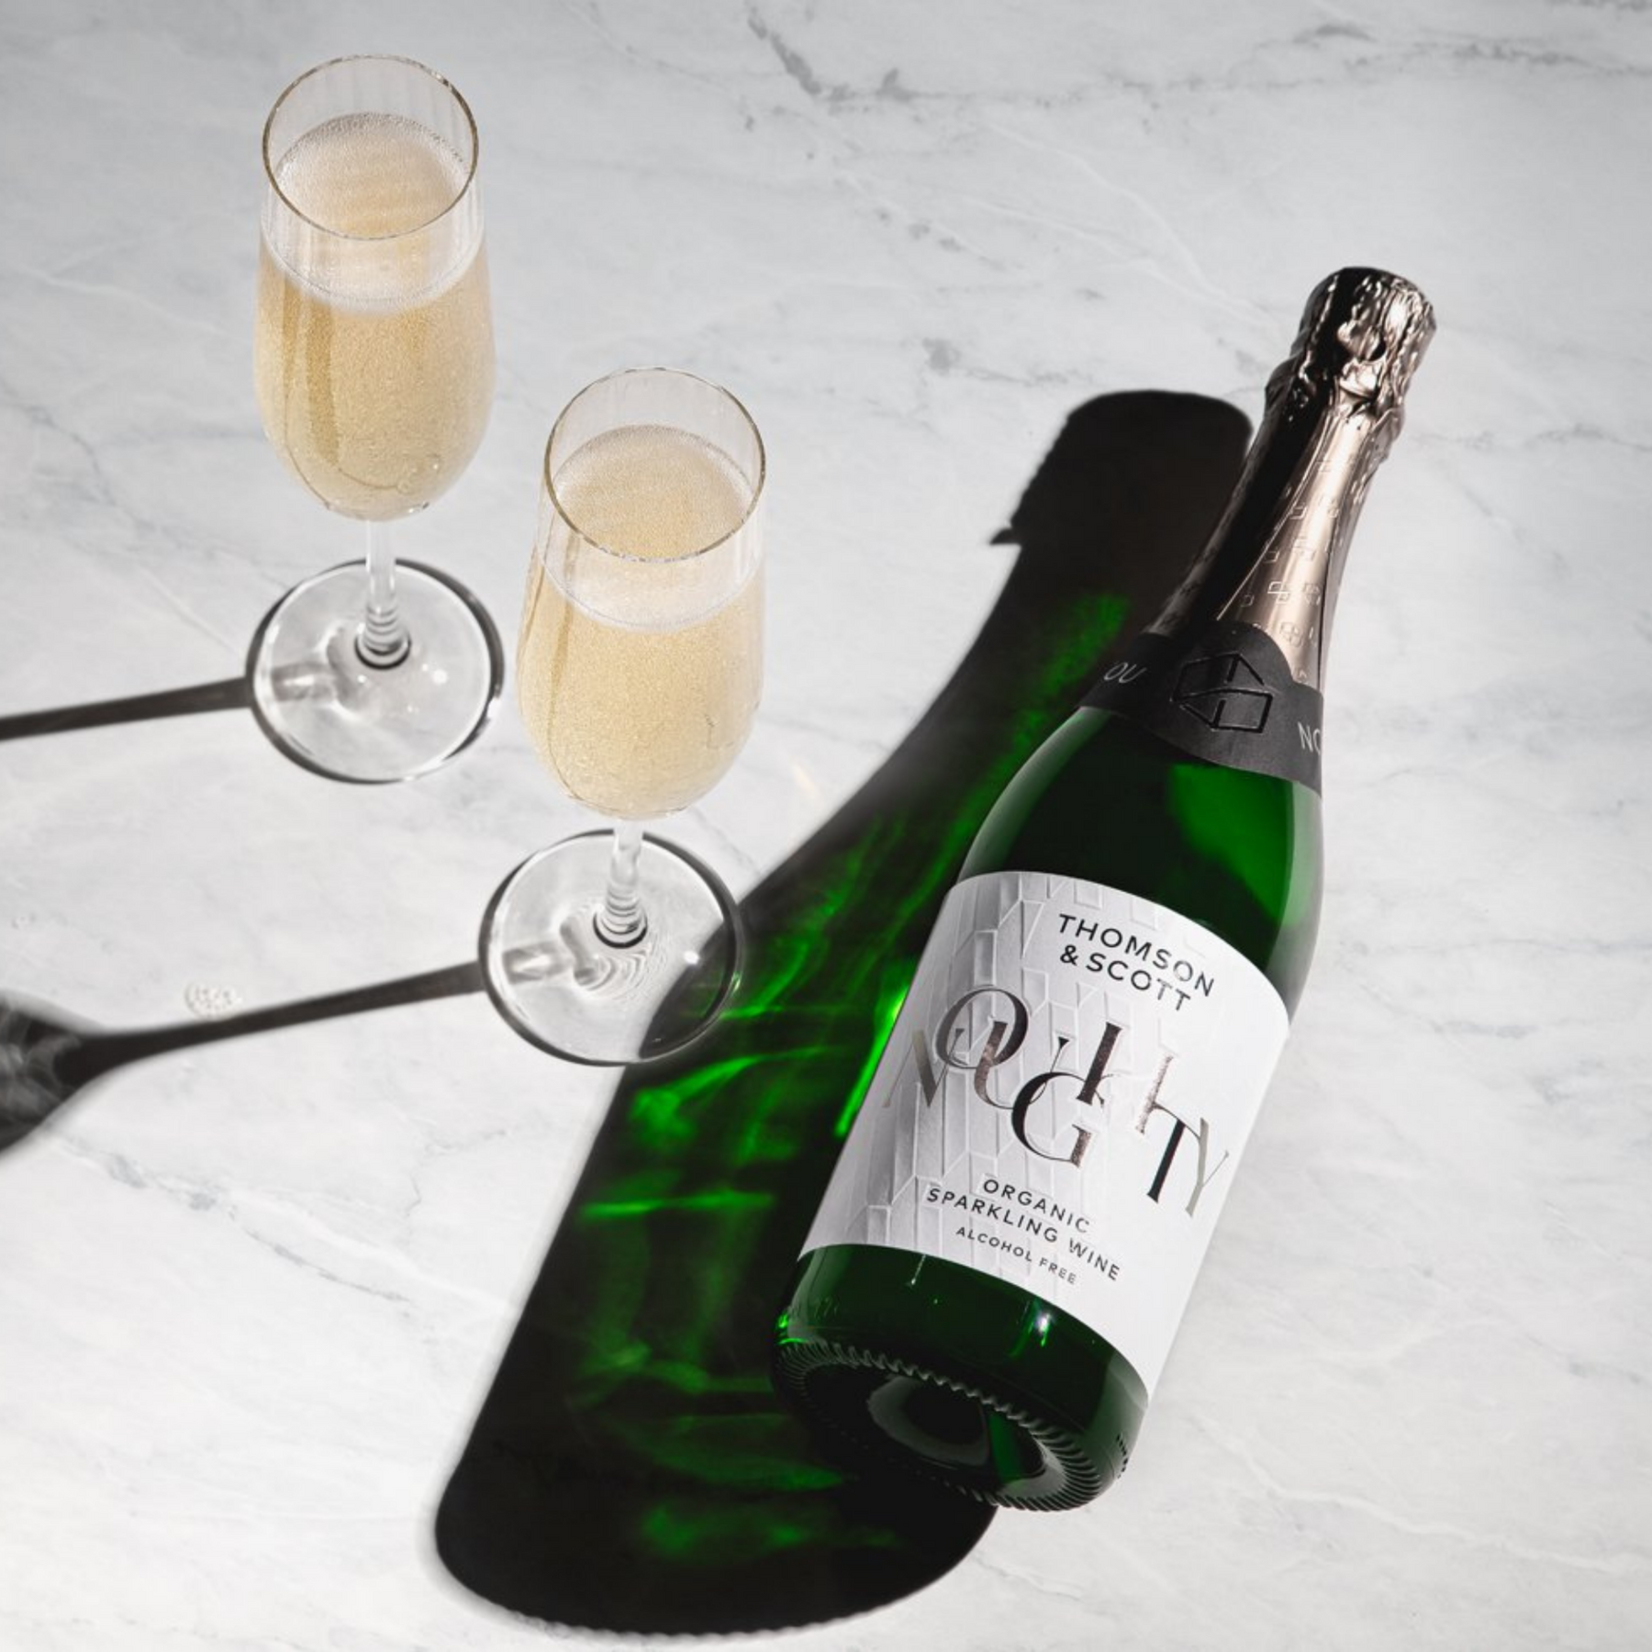 Noughty Alcohol-Free Sparkling Chardonnay